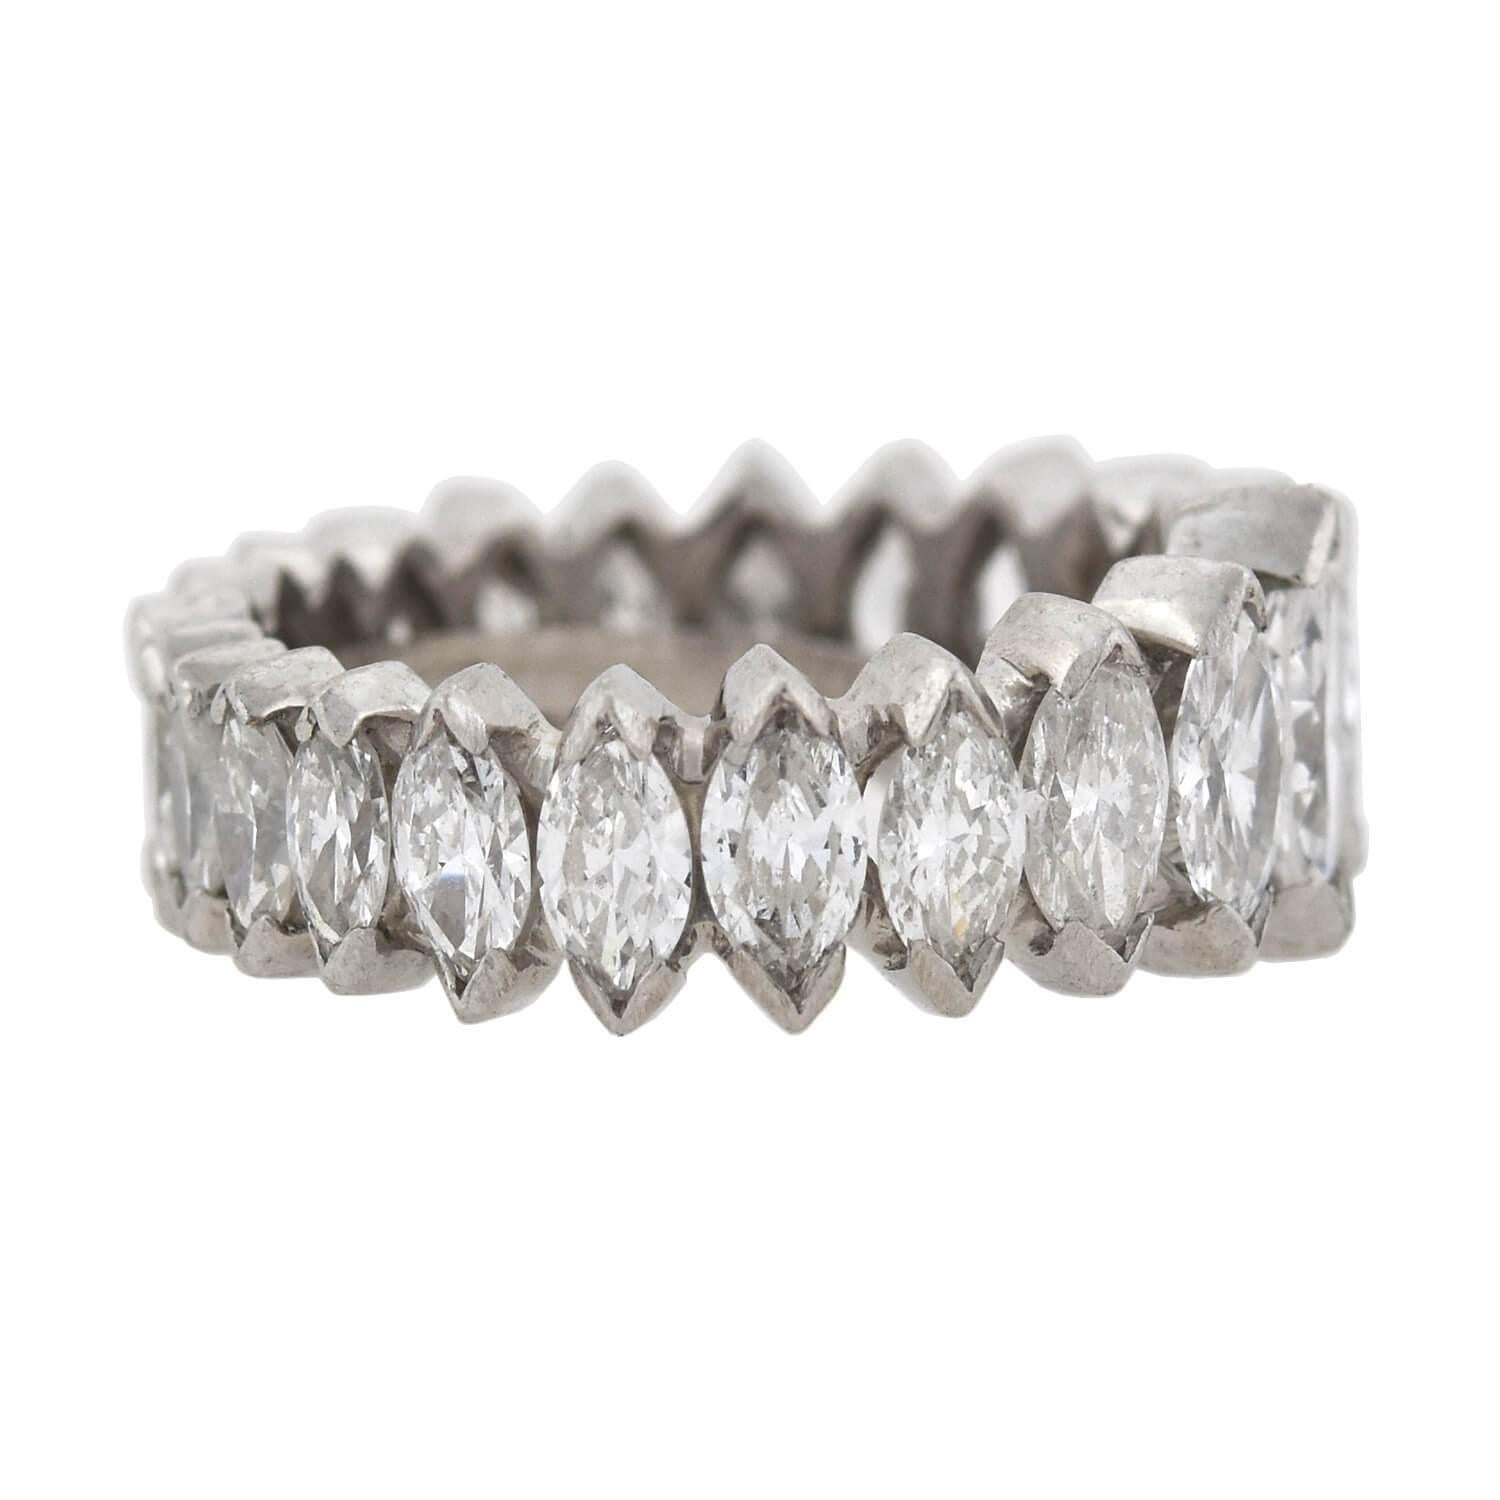 A stunning Vintage diamond eternity band from the 1960s era! Crafted in platinum, this unique ring features a mesmerizing row of Marquise Cut diamonds that subtly graduate in size towards the back. With 23 in total, each stone is held in a